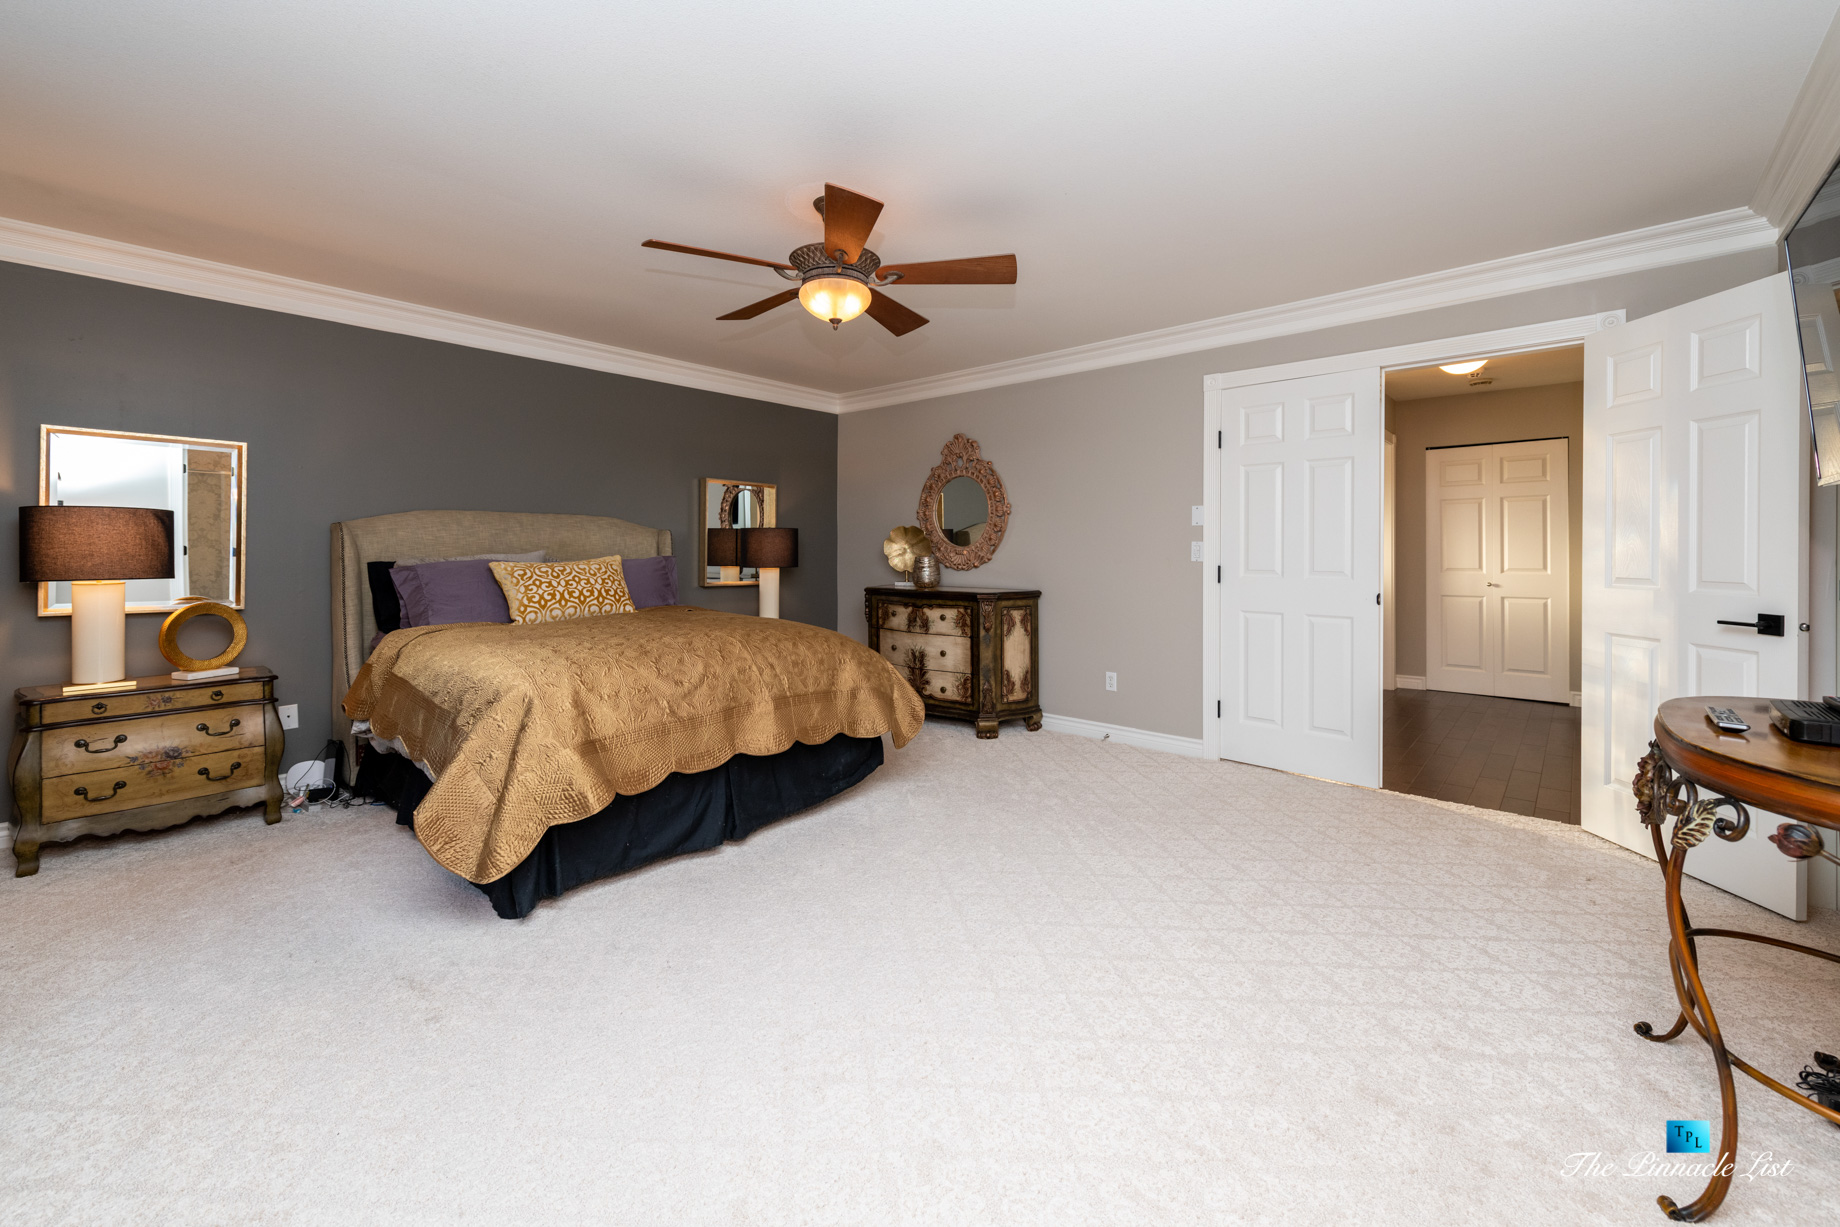 2366 Sunnyside Rd, Anmore, BC, Canada - Master Bedroom